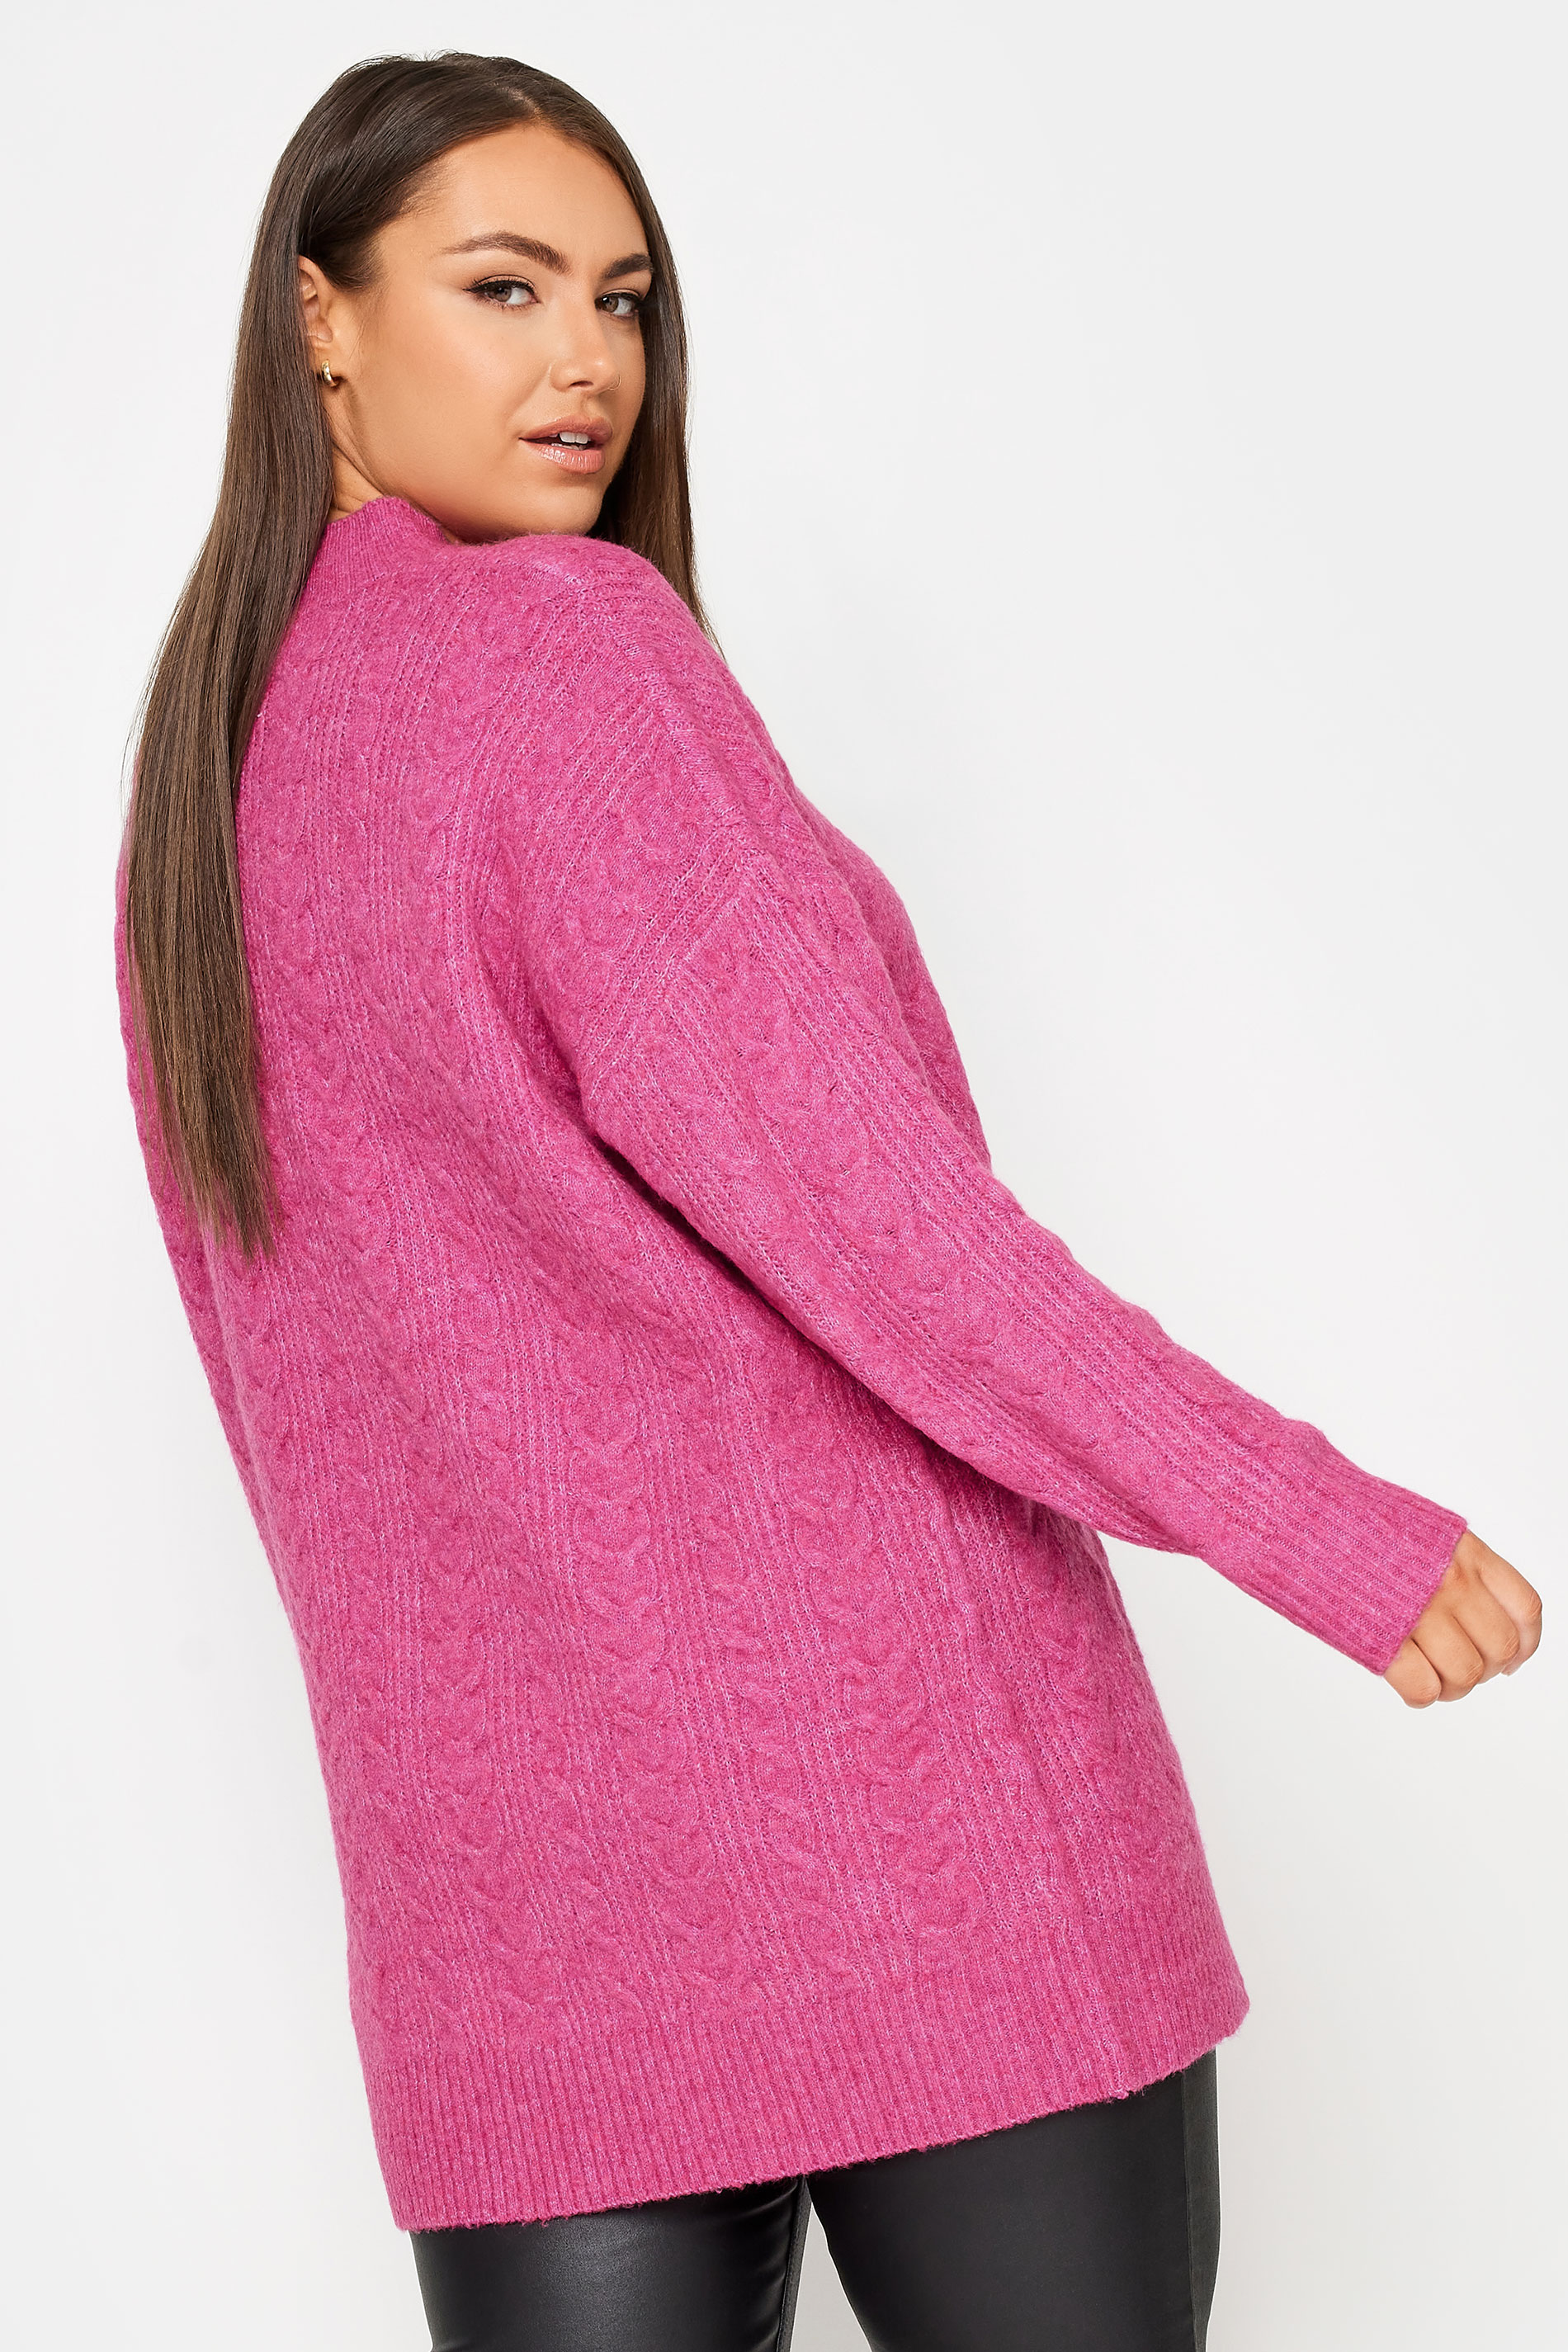 YOURS Plus Size Pink Cable Knit Turtle Neck Jumper | Yours Clothing 3